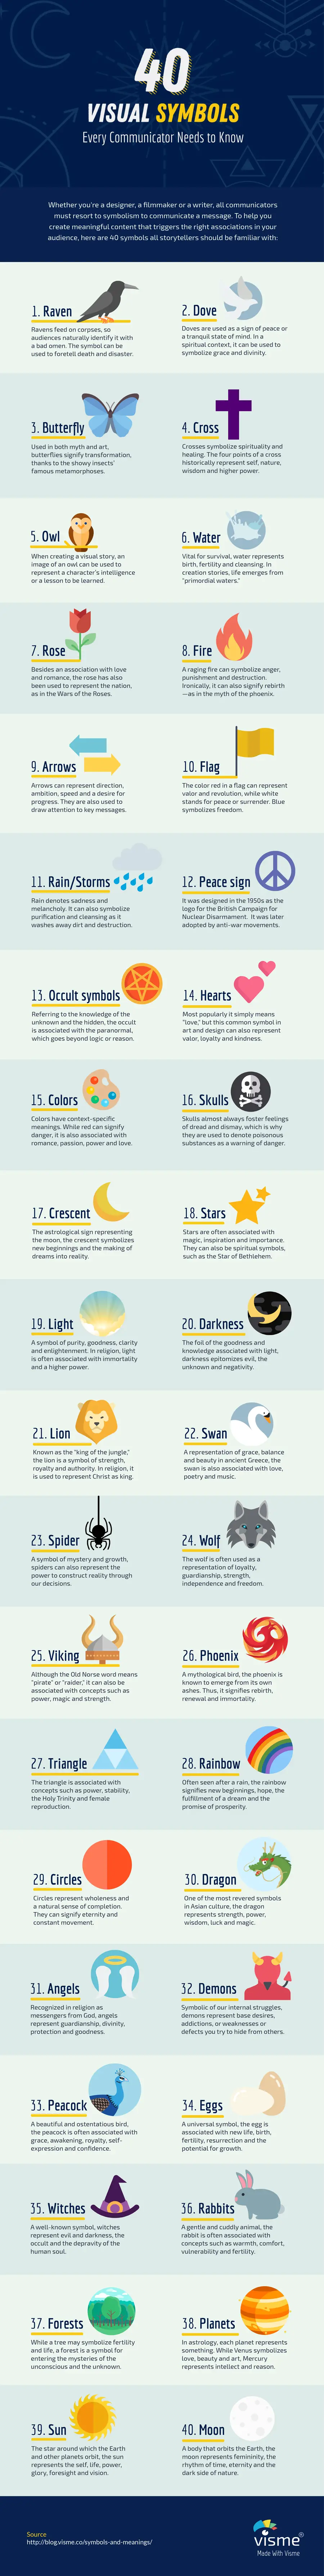 Common Symbols Associated With Dreams Of Moving